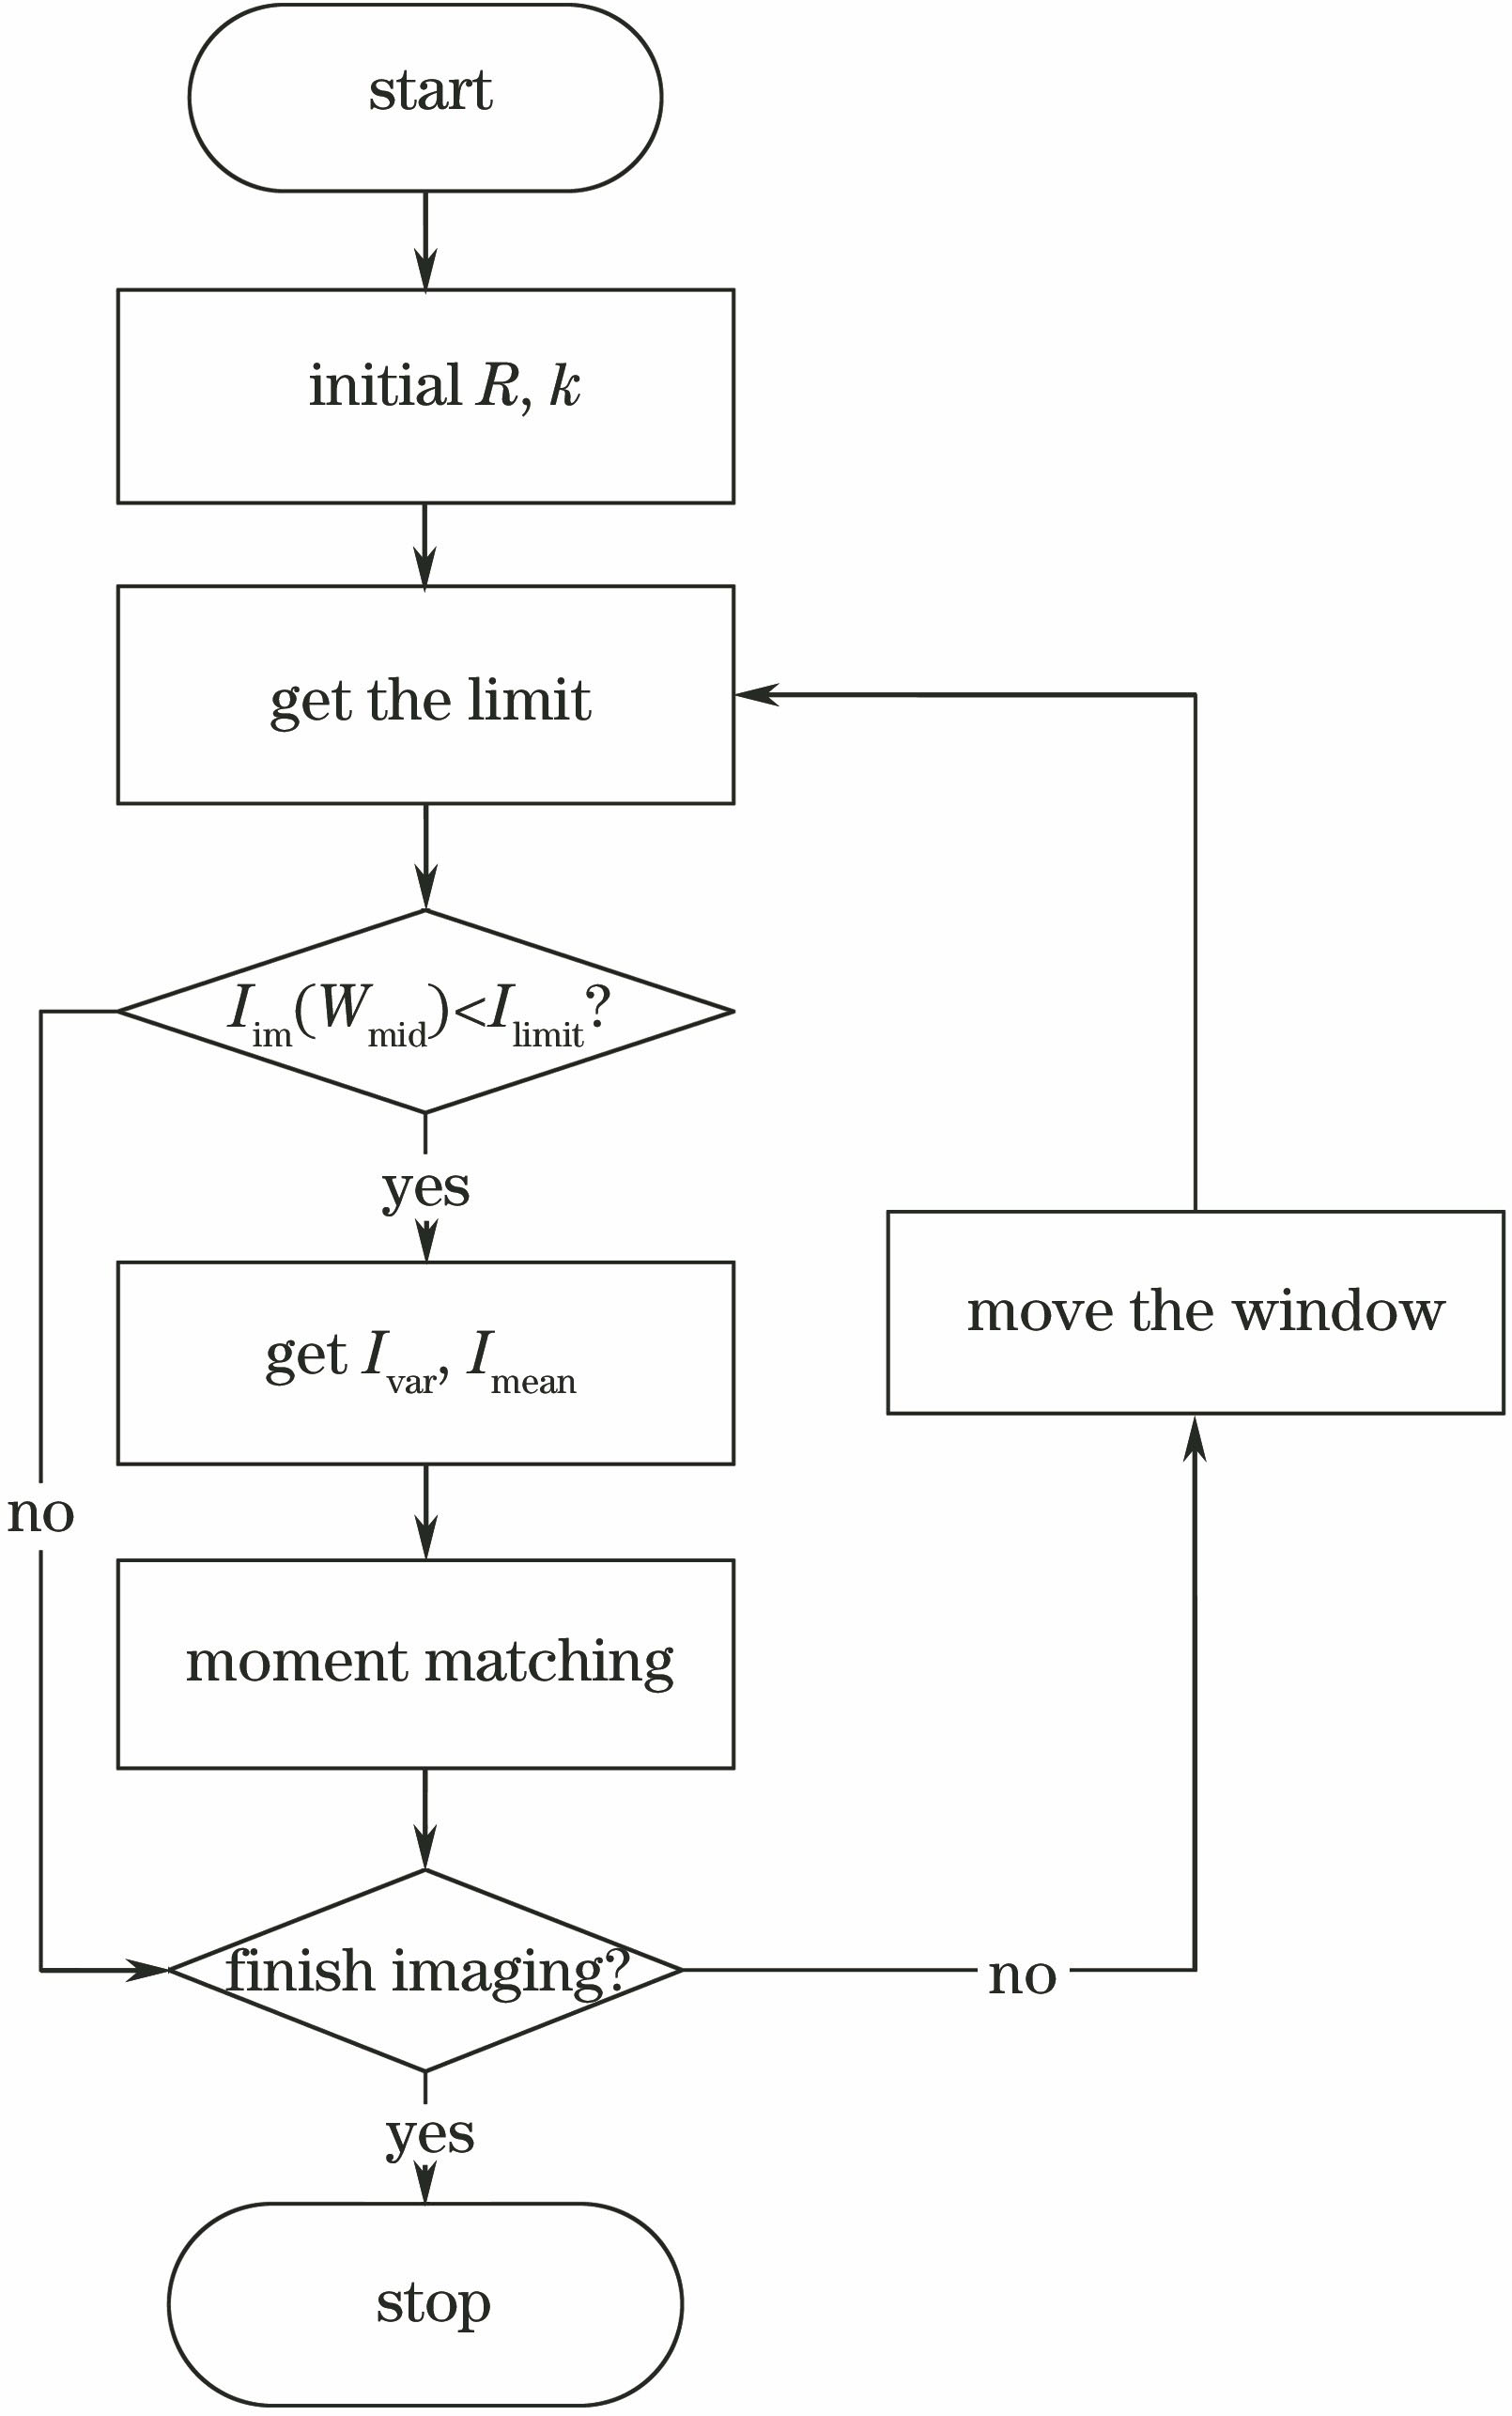 Flow chart of improved moment matching non-uniformity correction algorithm